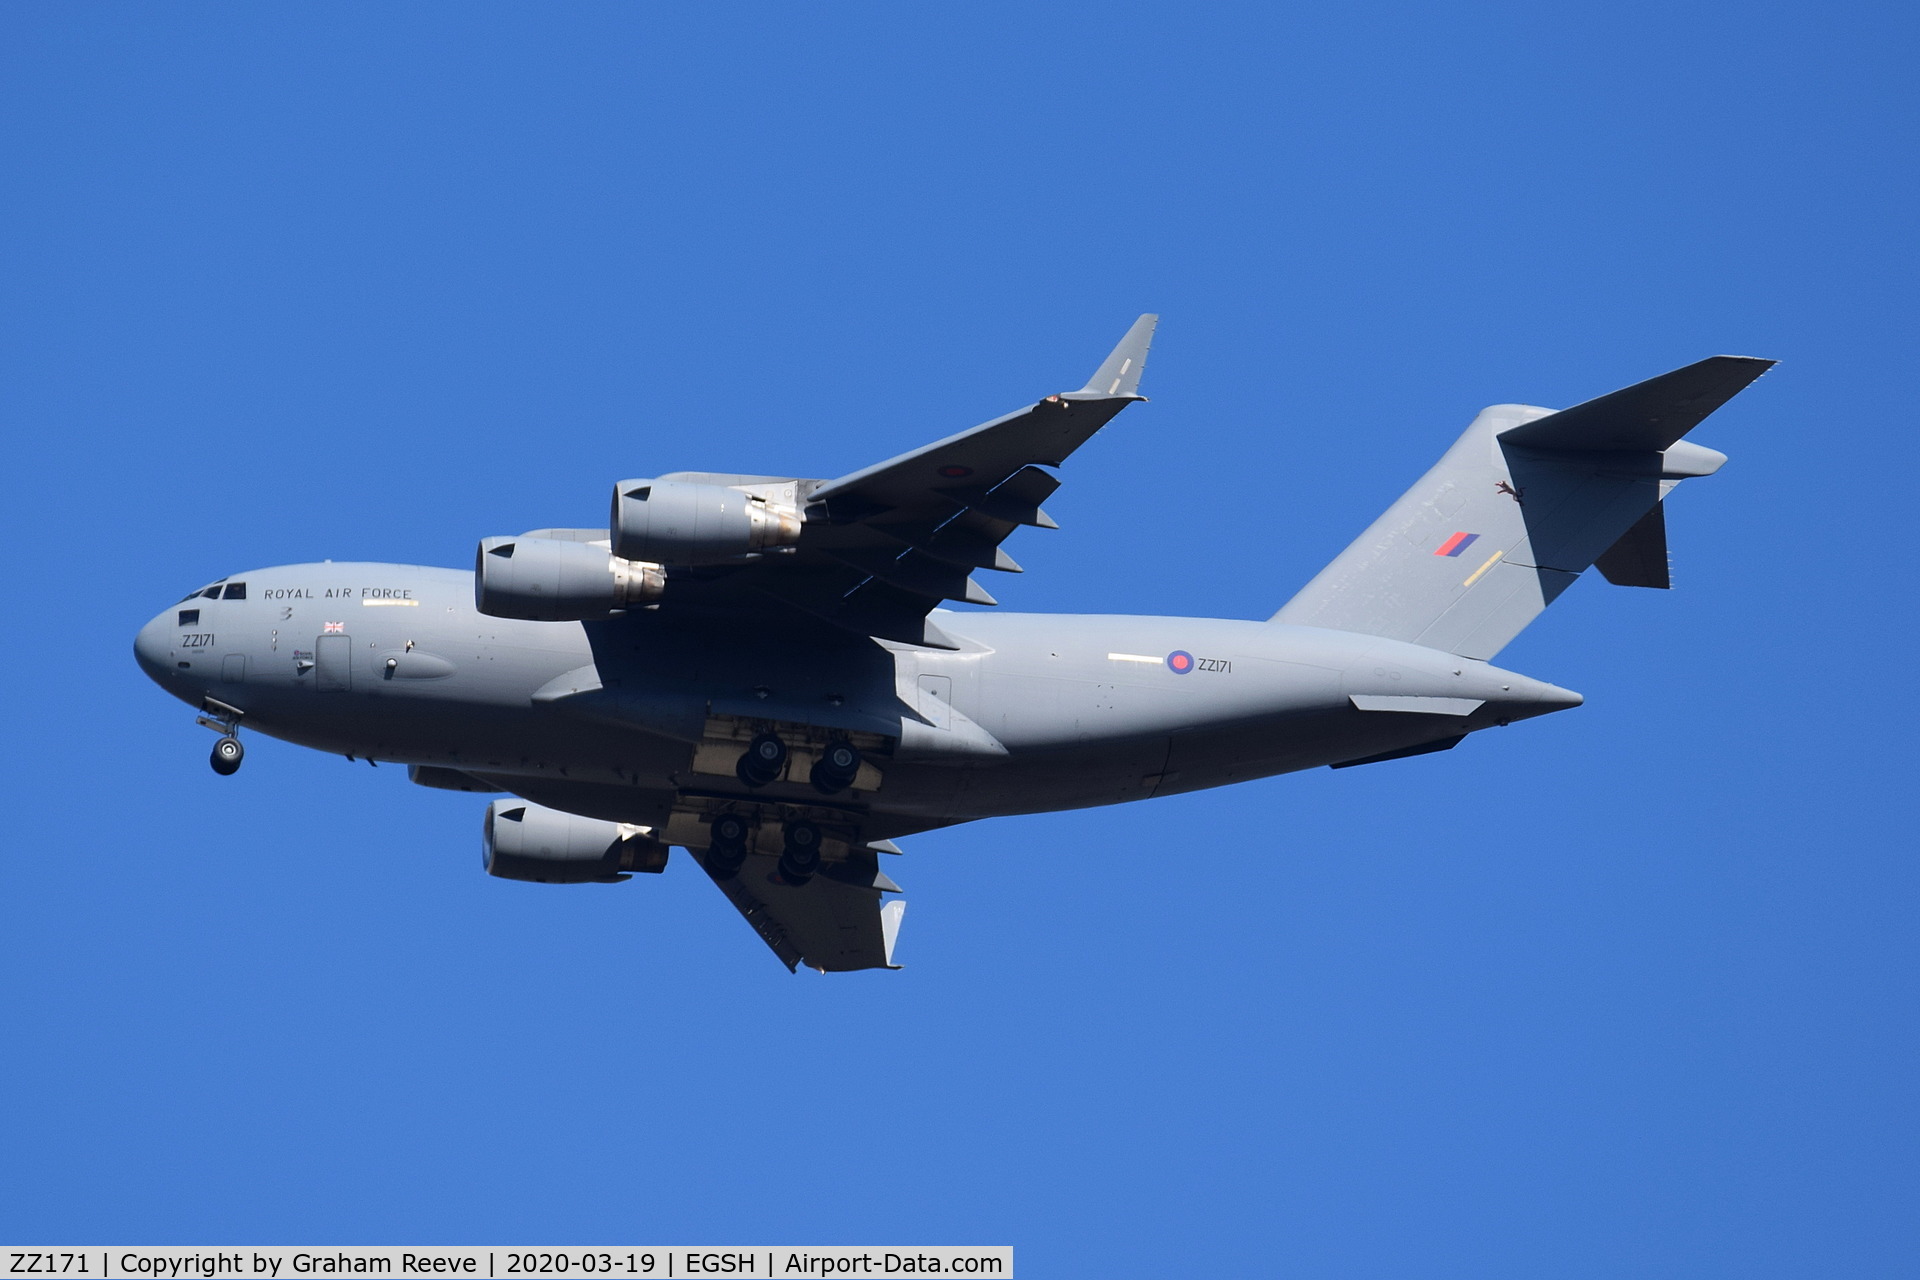 ZZ171, 2000 Boeing C-17A Globemaster III C/N F-007, In the circuit over Spixworth.